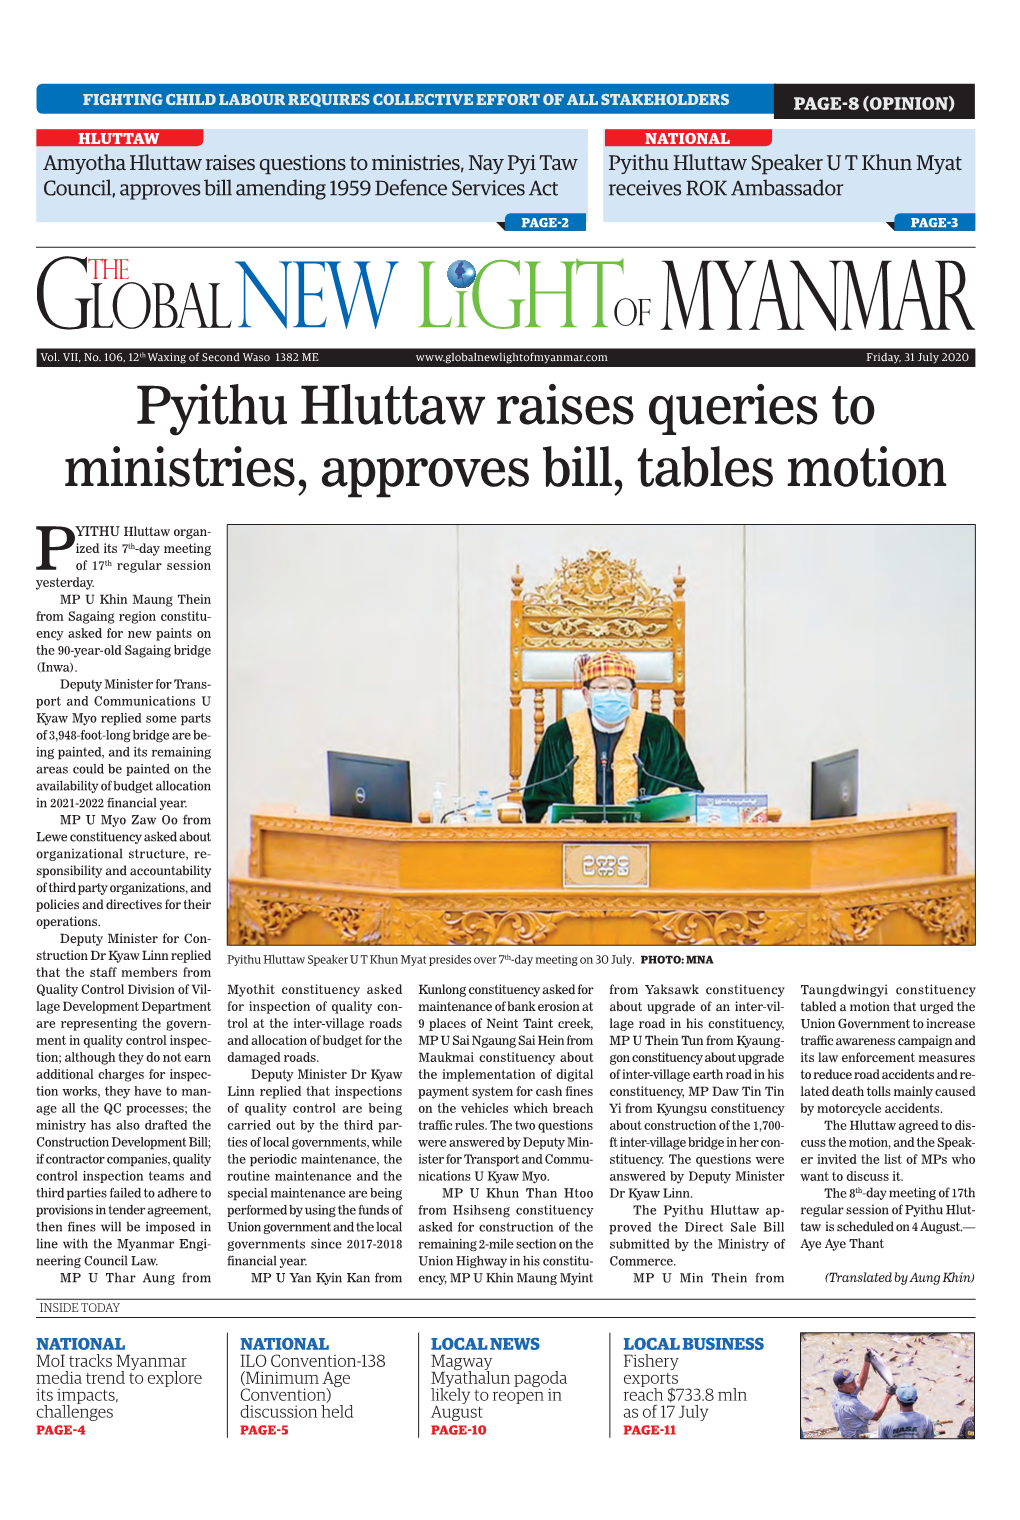 Pyithu Hluttaw Raises Queries to Ministries, Approves Bill, Tables Motion